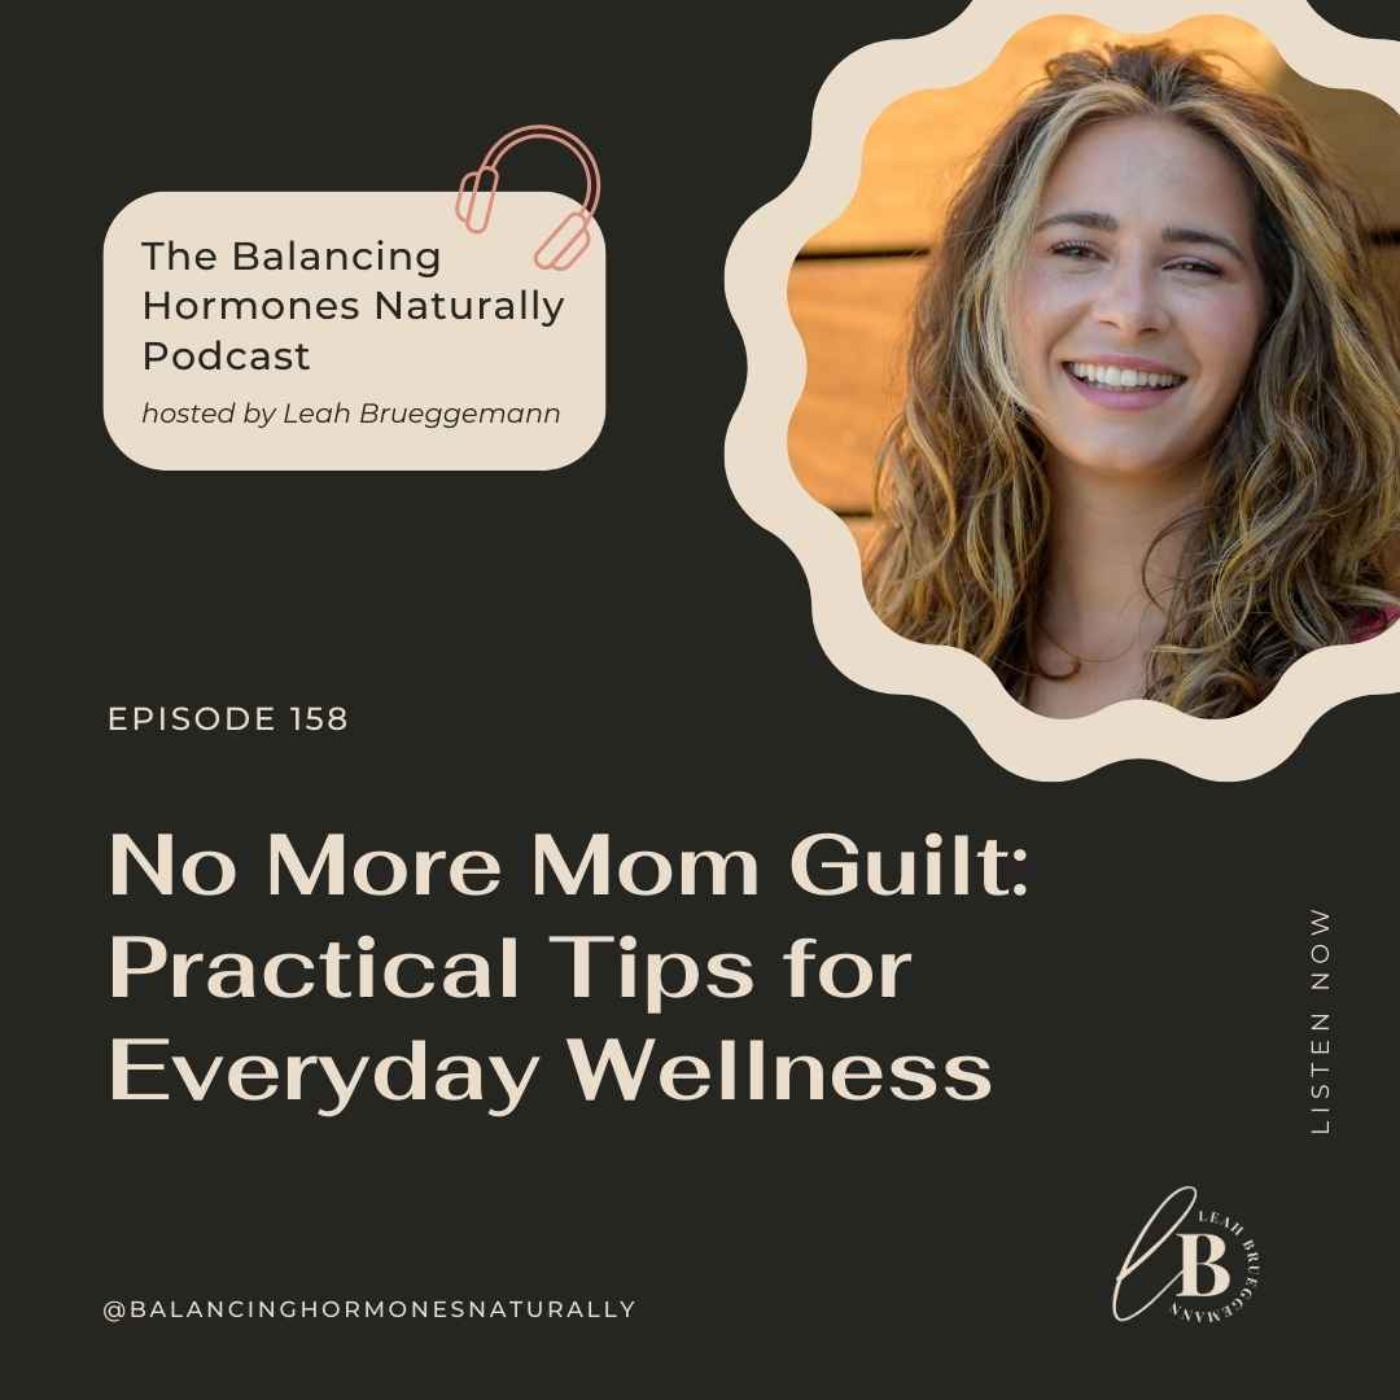 Episode 158: No More Mom Guilt: Practical Tips for Everyday Wellness